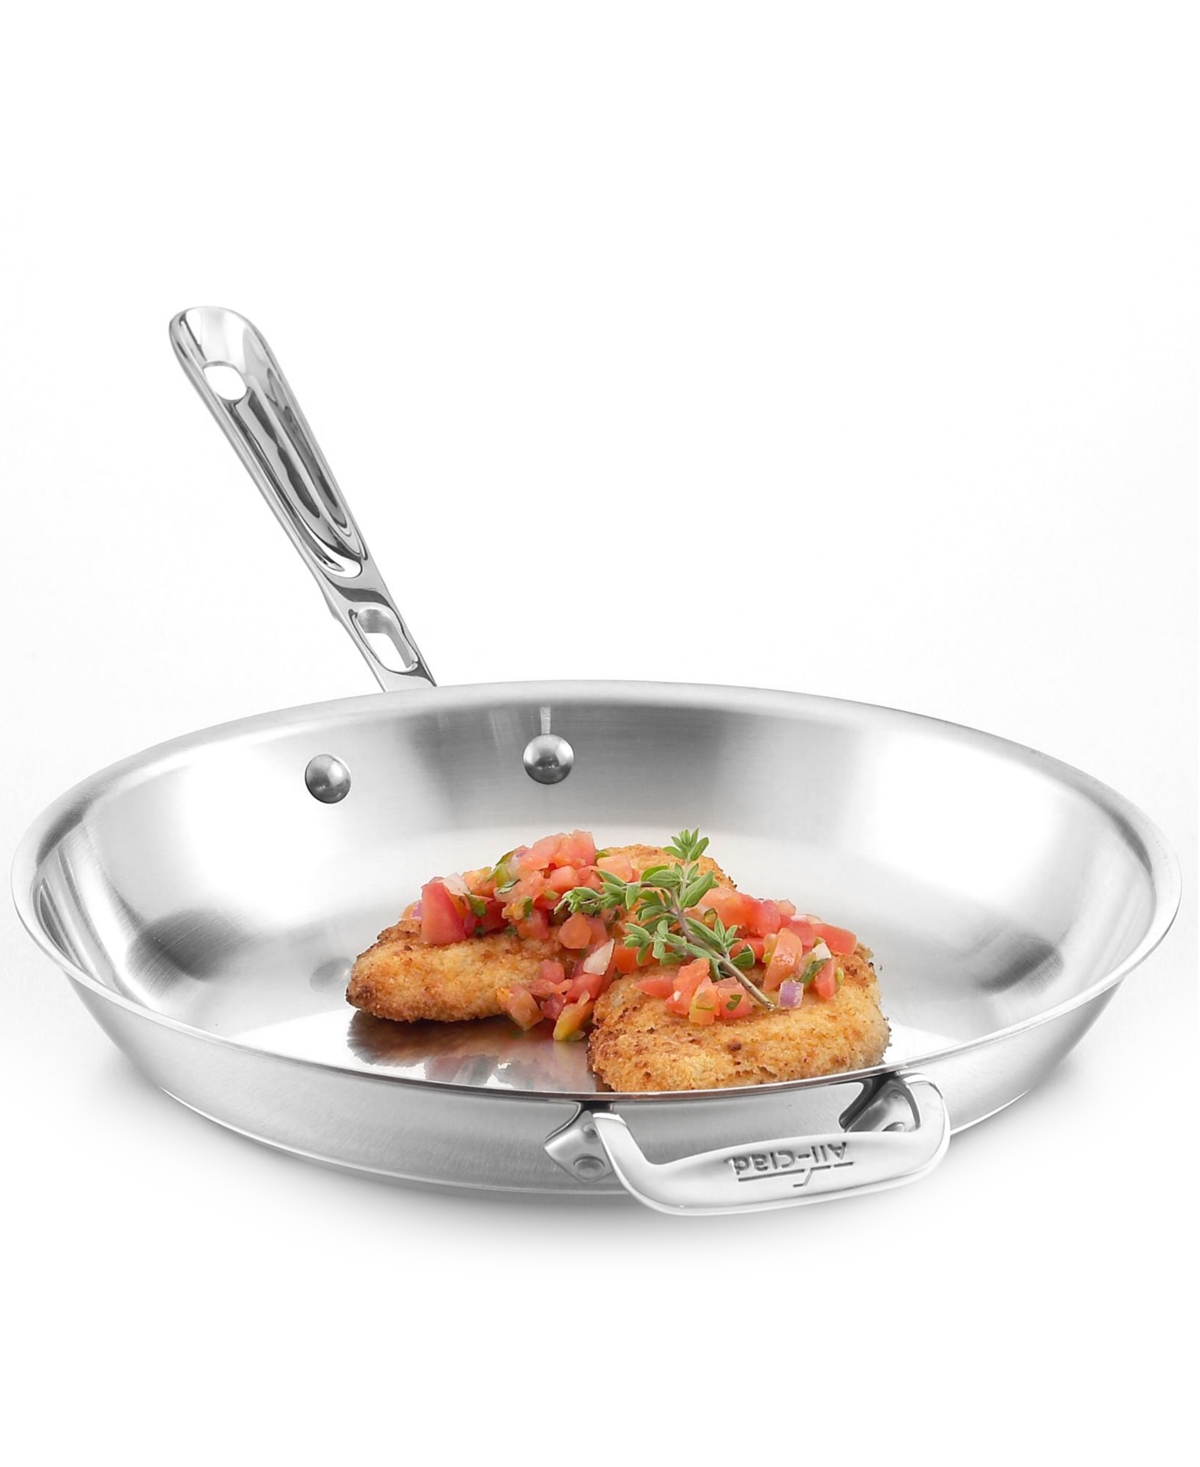 All-Clad Copper-Core 12 Fry Pan